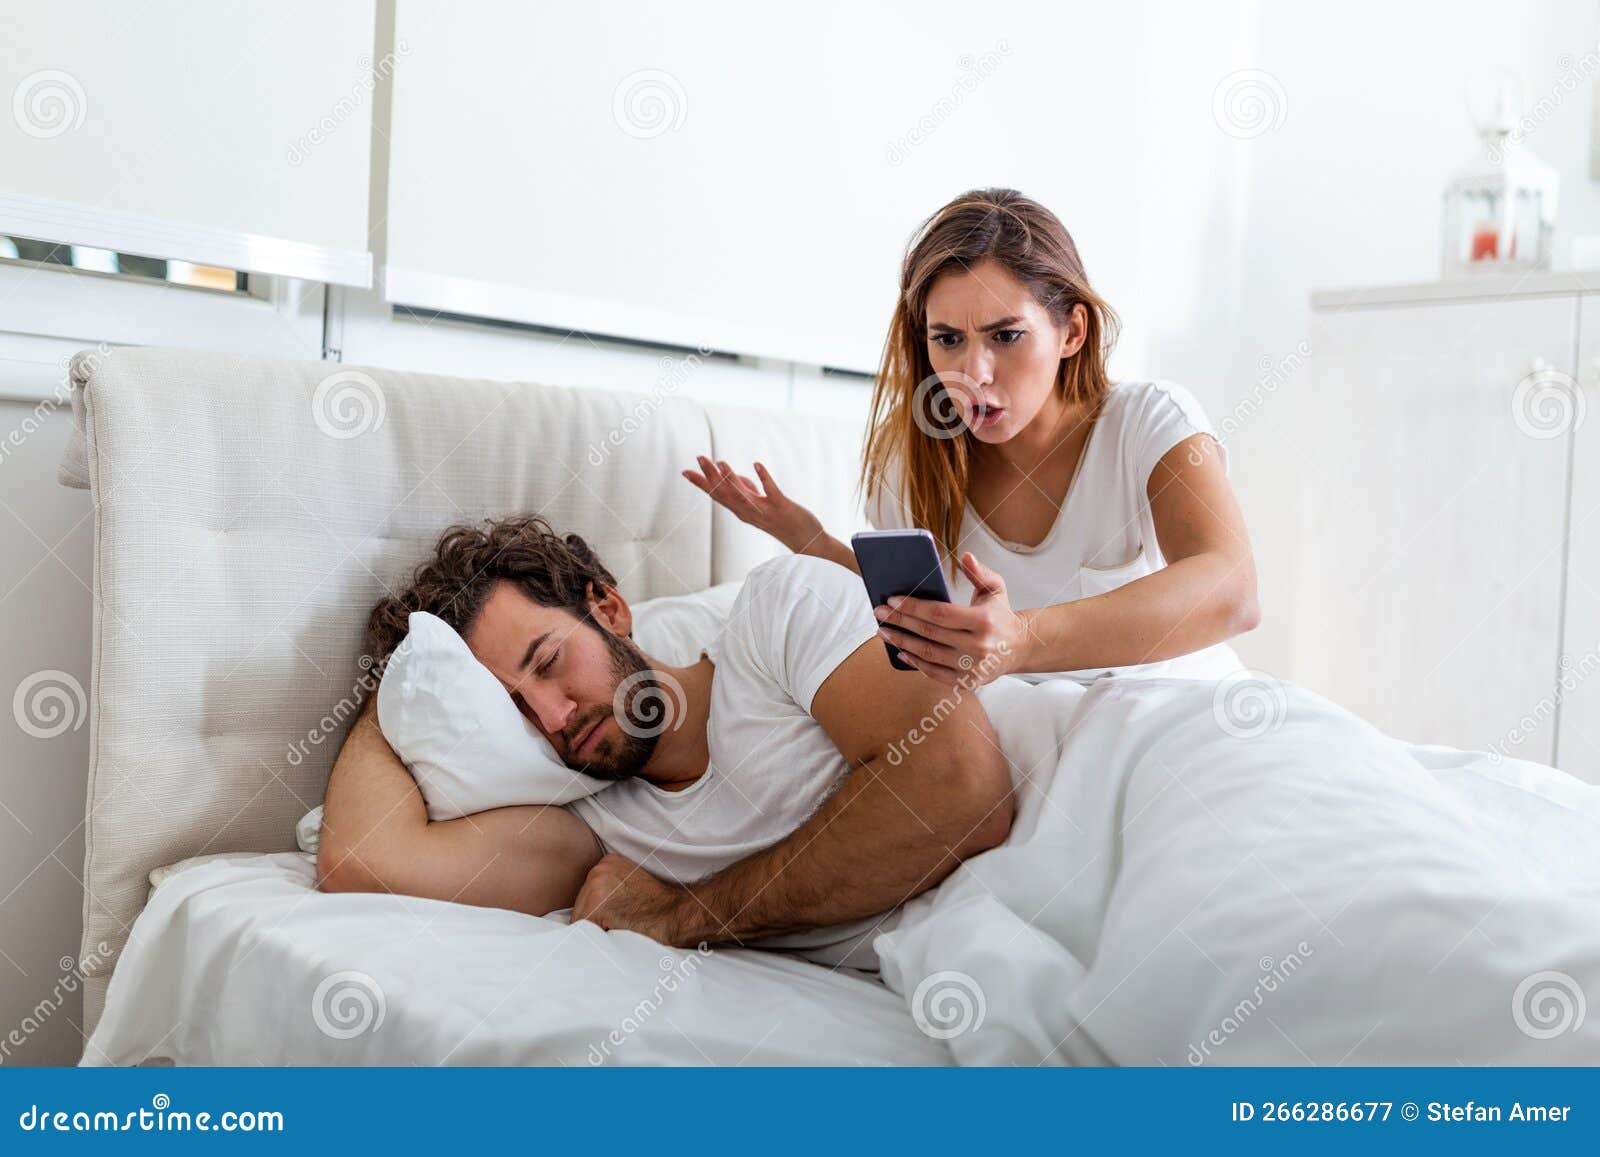 Jealous Wife Spying The Phone Of Her Partner While He Is Sleeping In A Bed At Home Shocked